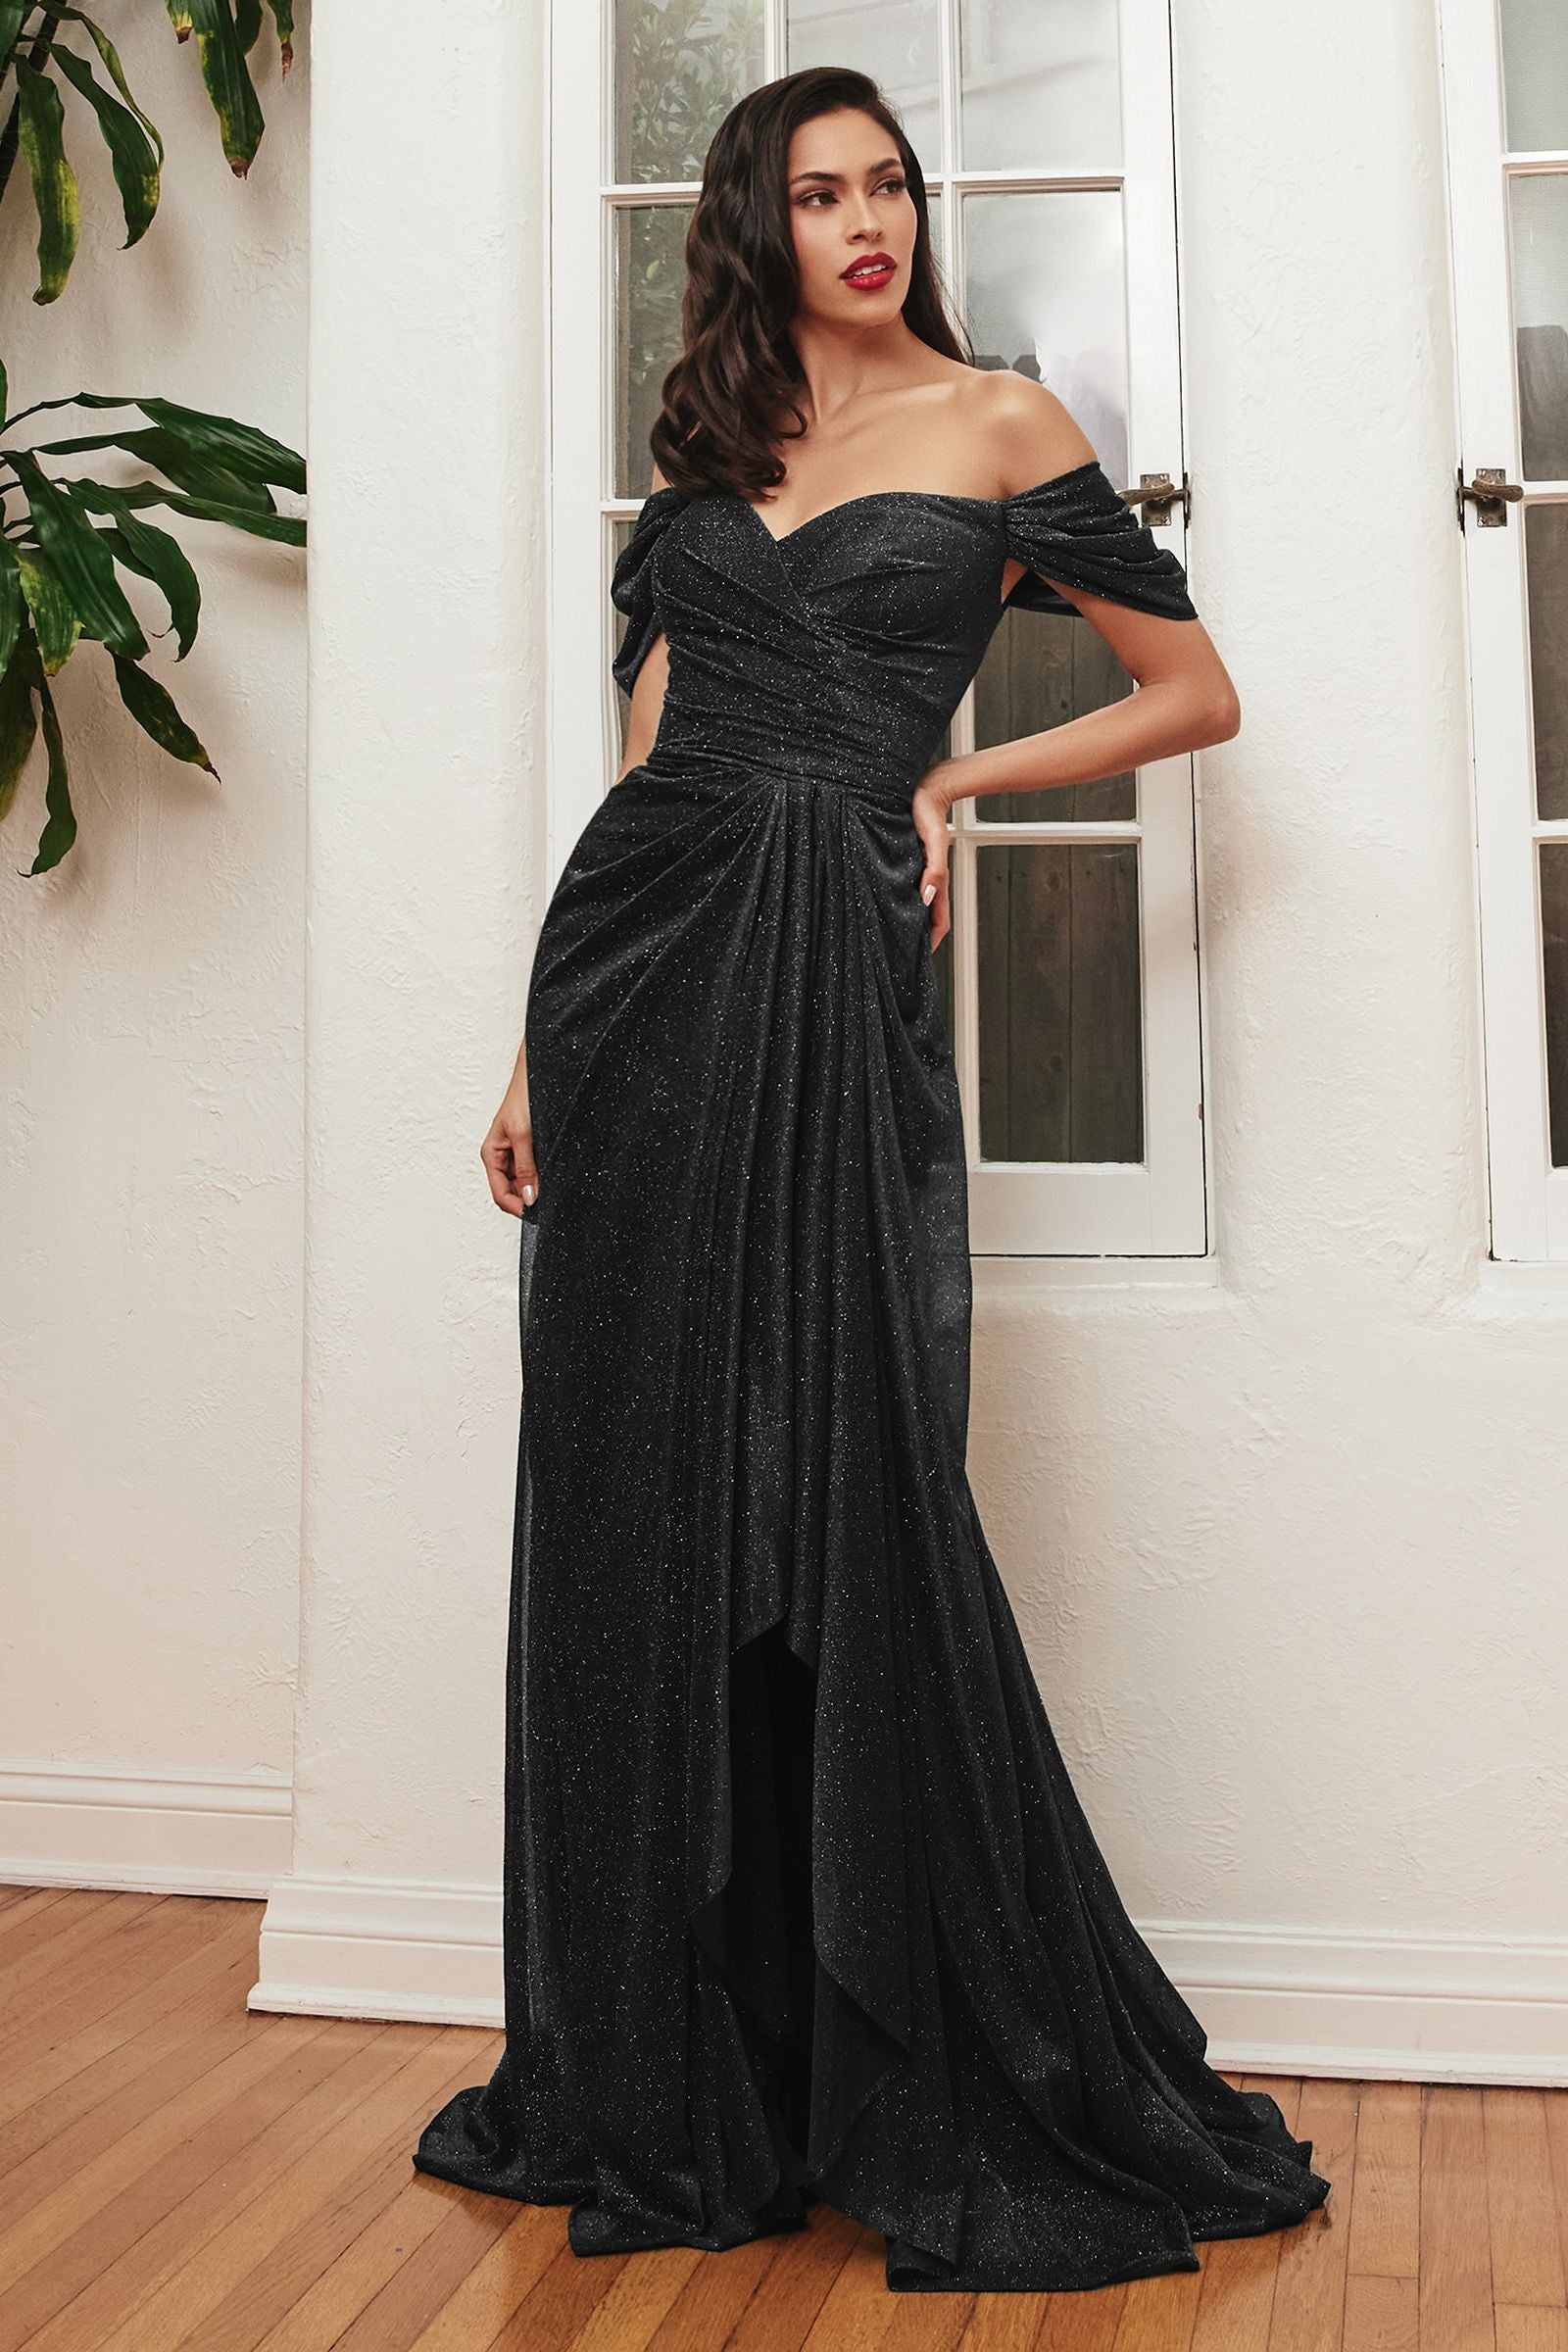 Black Tiered sash detail for added style and elegance on this stunning glitter gown.